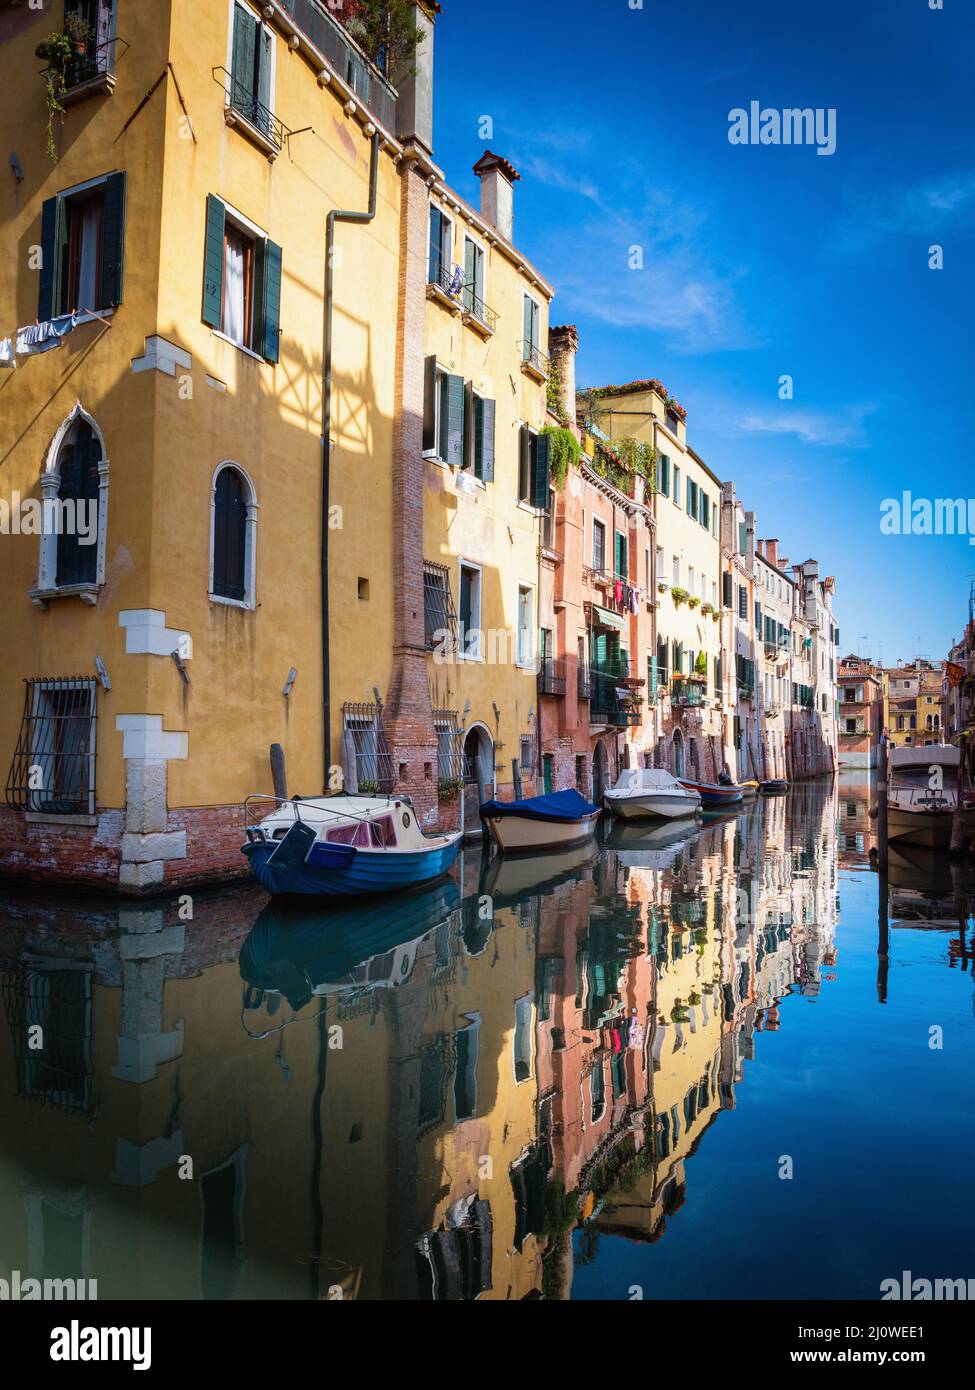 Colorful houses in the old medieval street in Venice, Italy Stock Photo